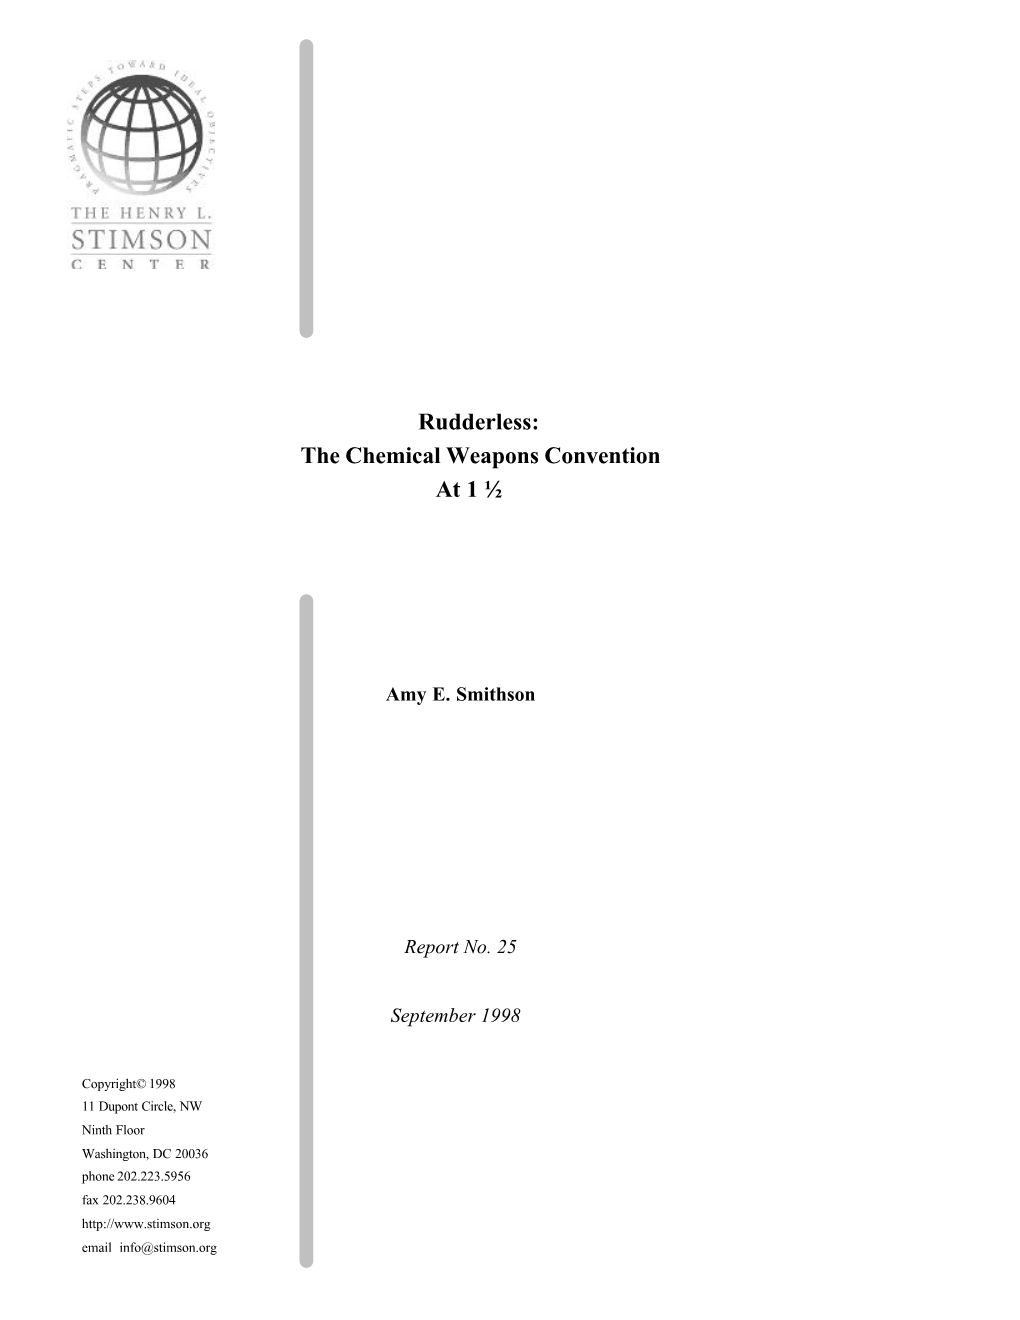 The Chemical Weapons Conventions at 1